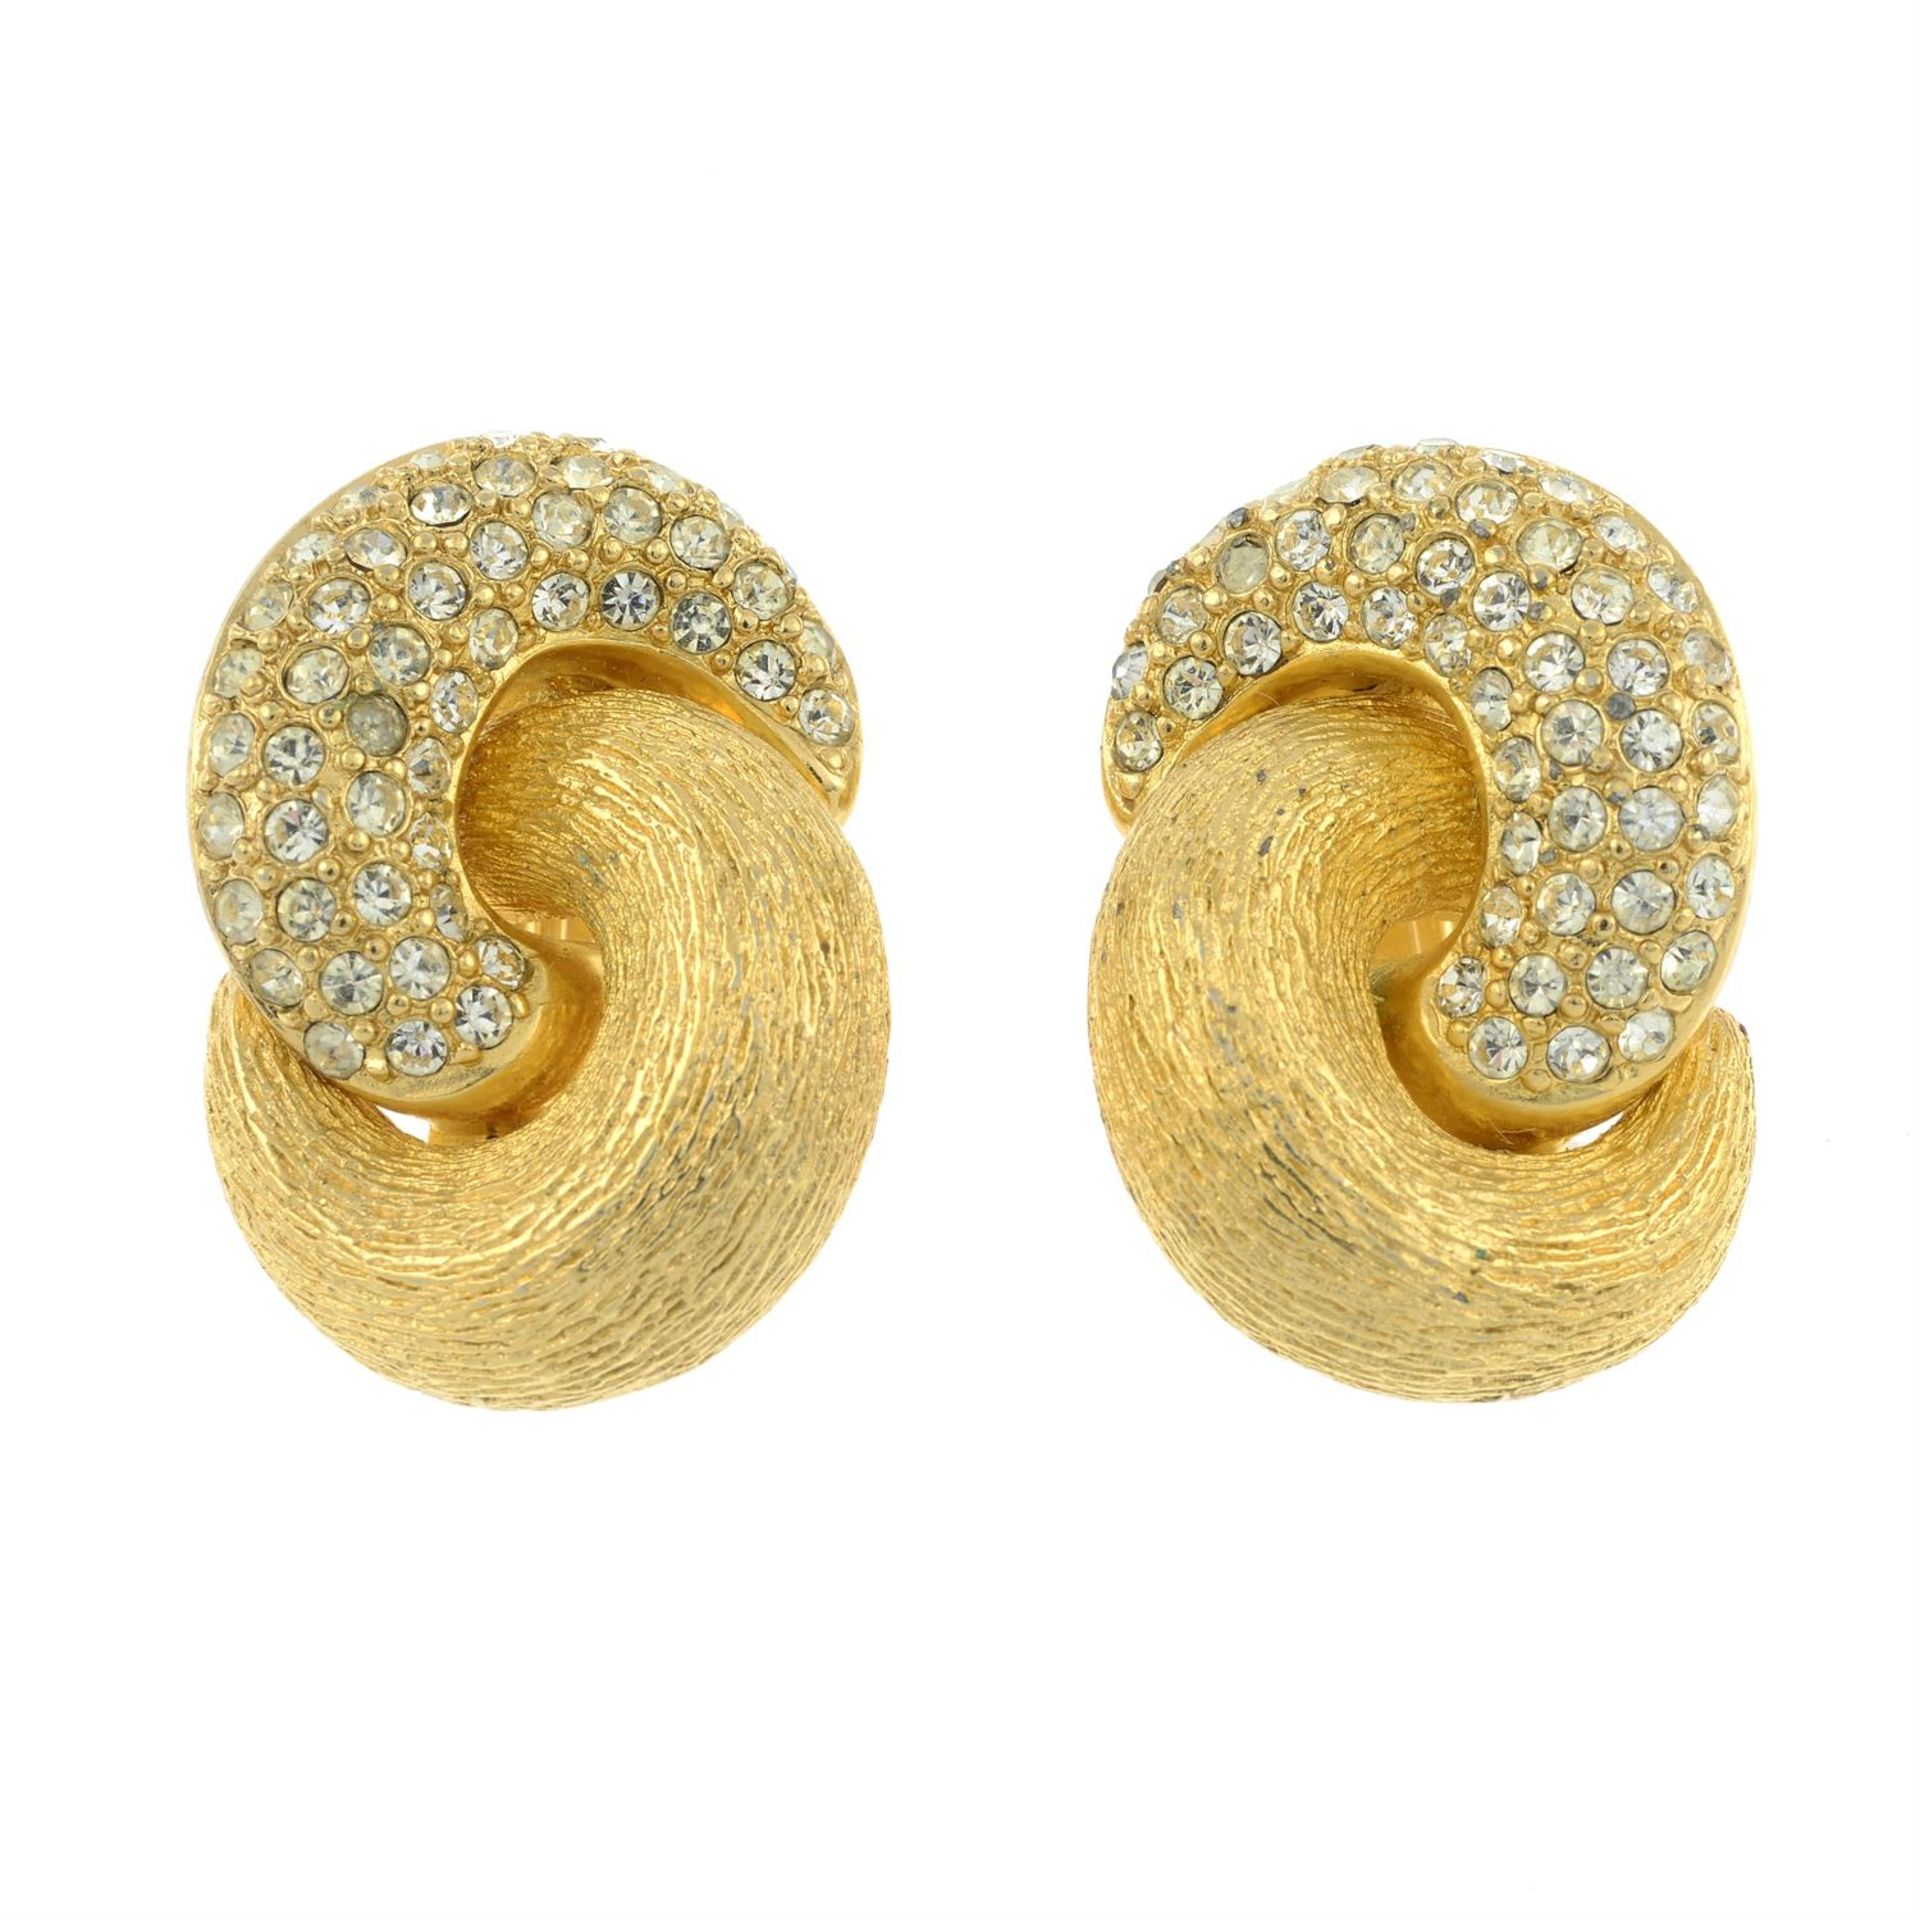 CHRISTIAN DIOR - a pair of clip-on earrings.